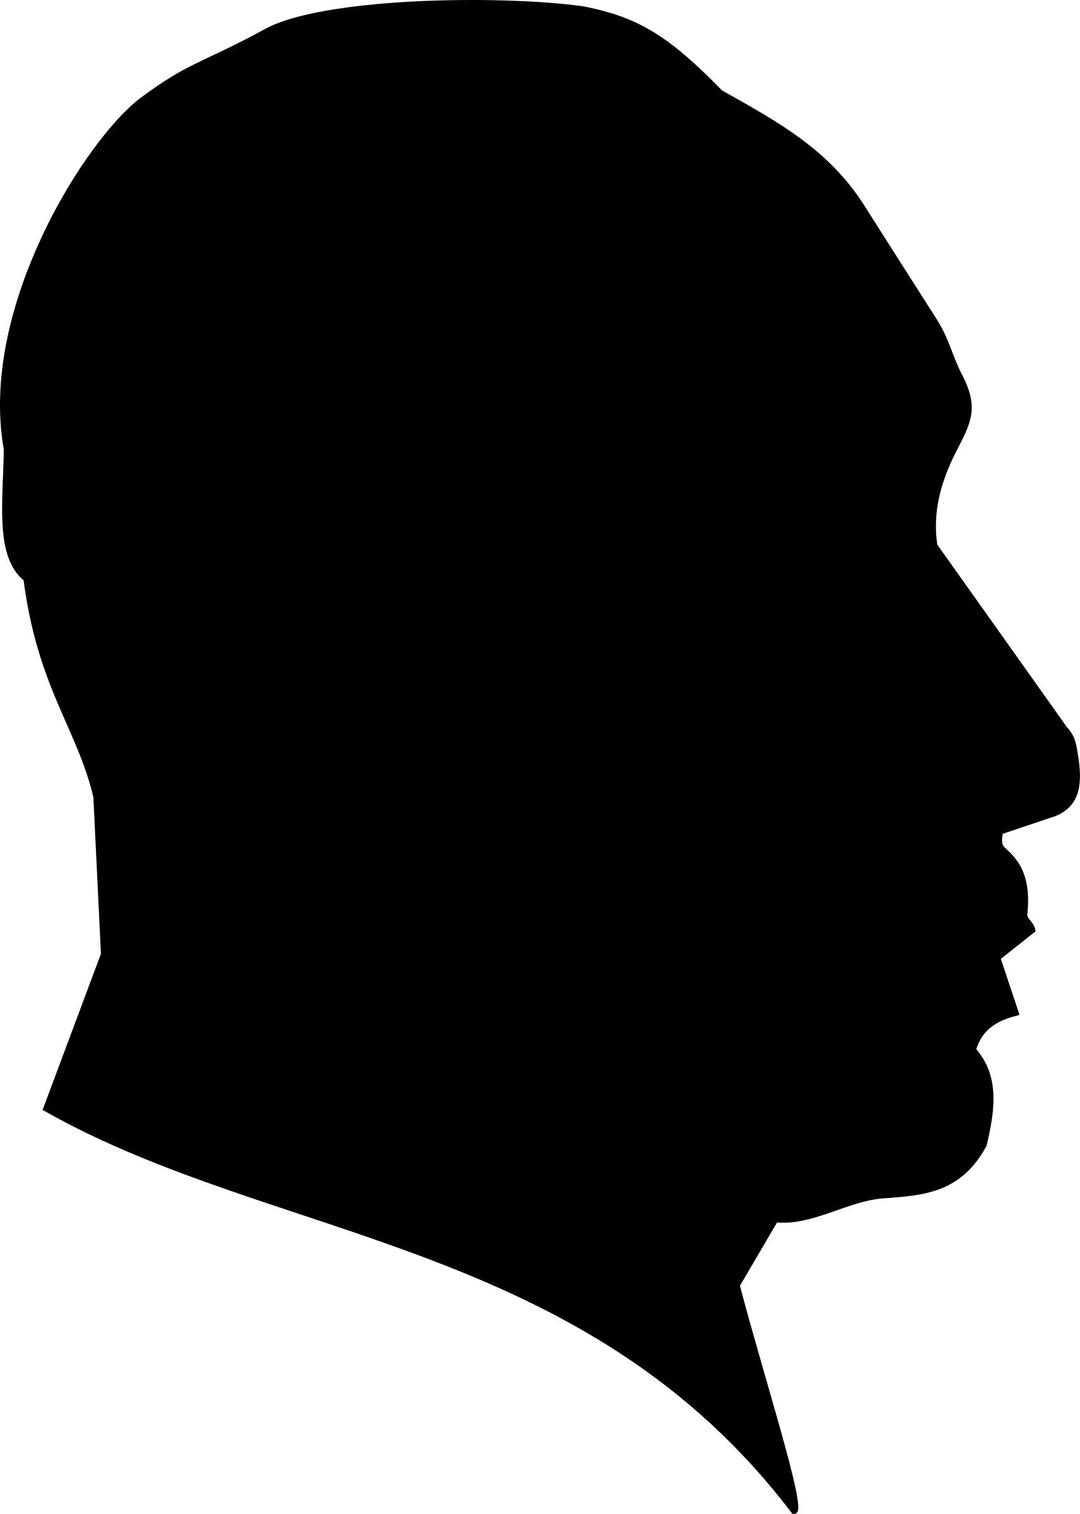 Dr. Martin Luther King Profile Silhouette png transparent